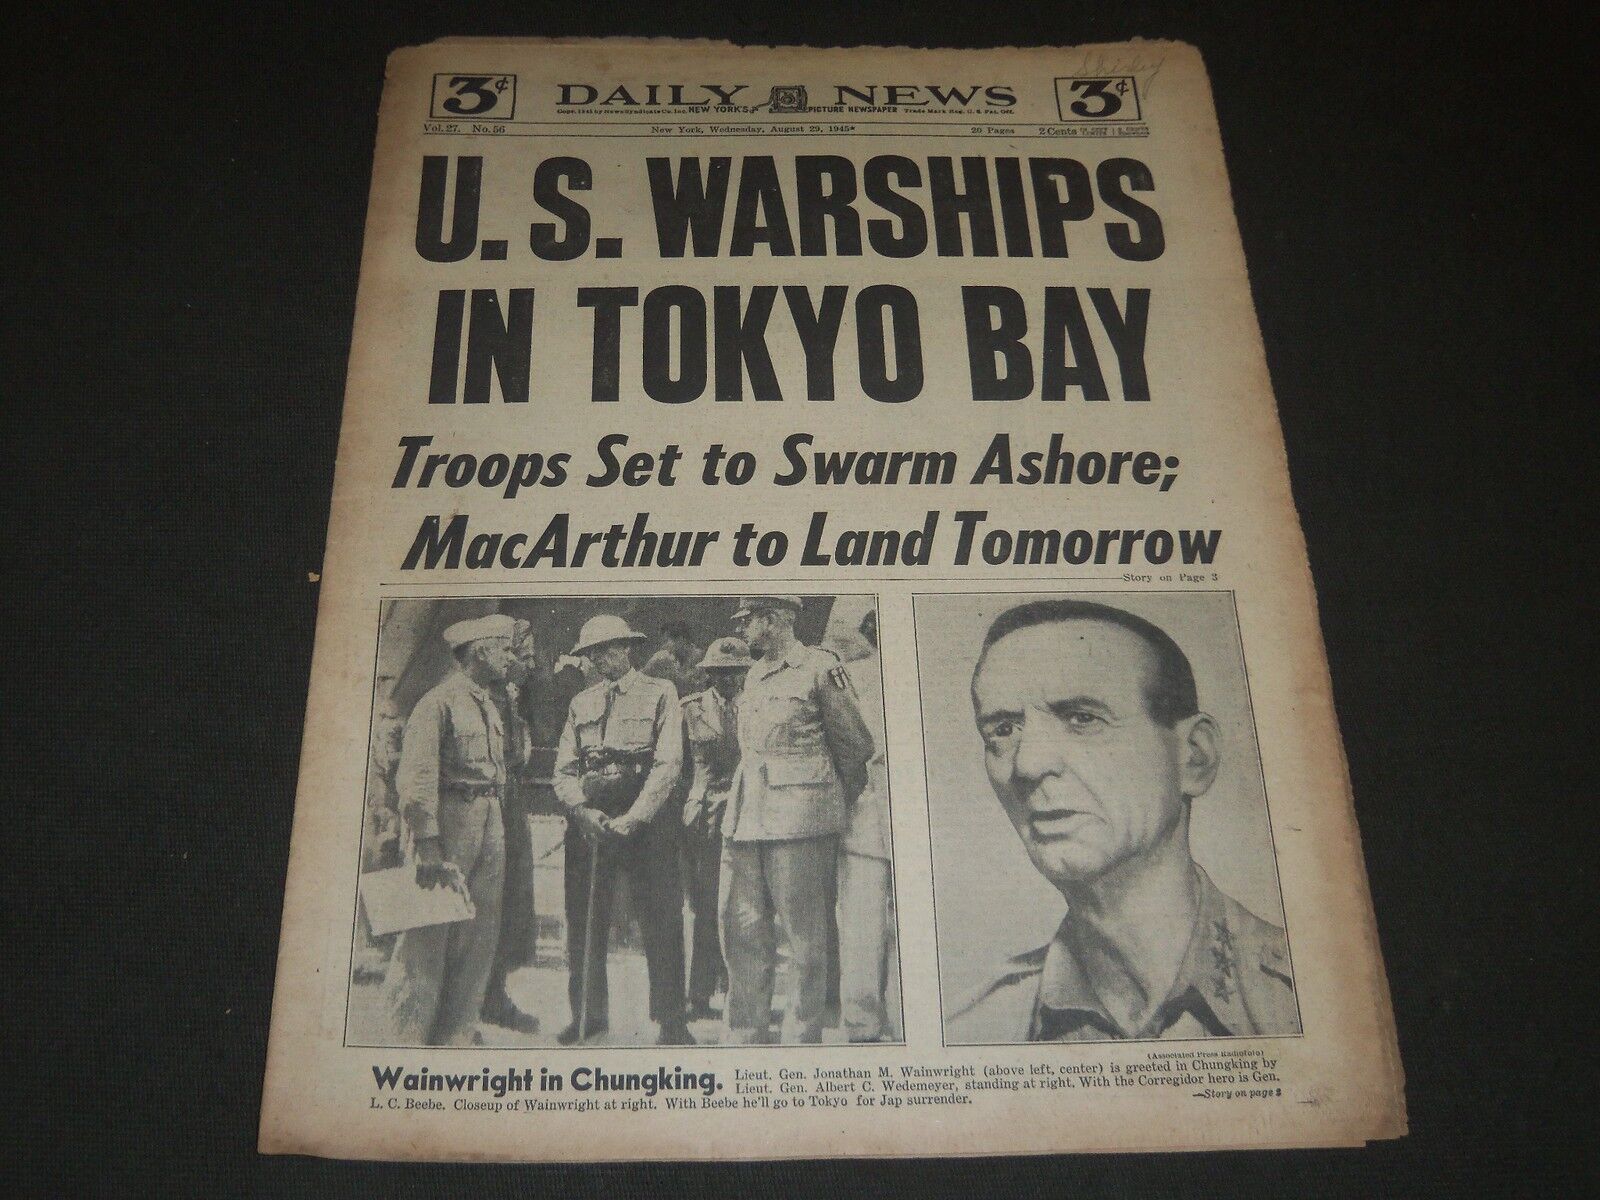 1945 AUGUST 29 NEW YORK DAILY NEWS - U. S. WARSHIPS IN TOKYO BAY - NP 2065